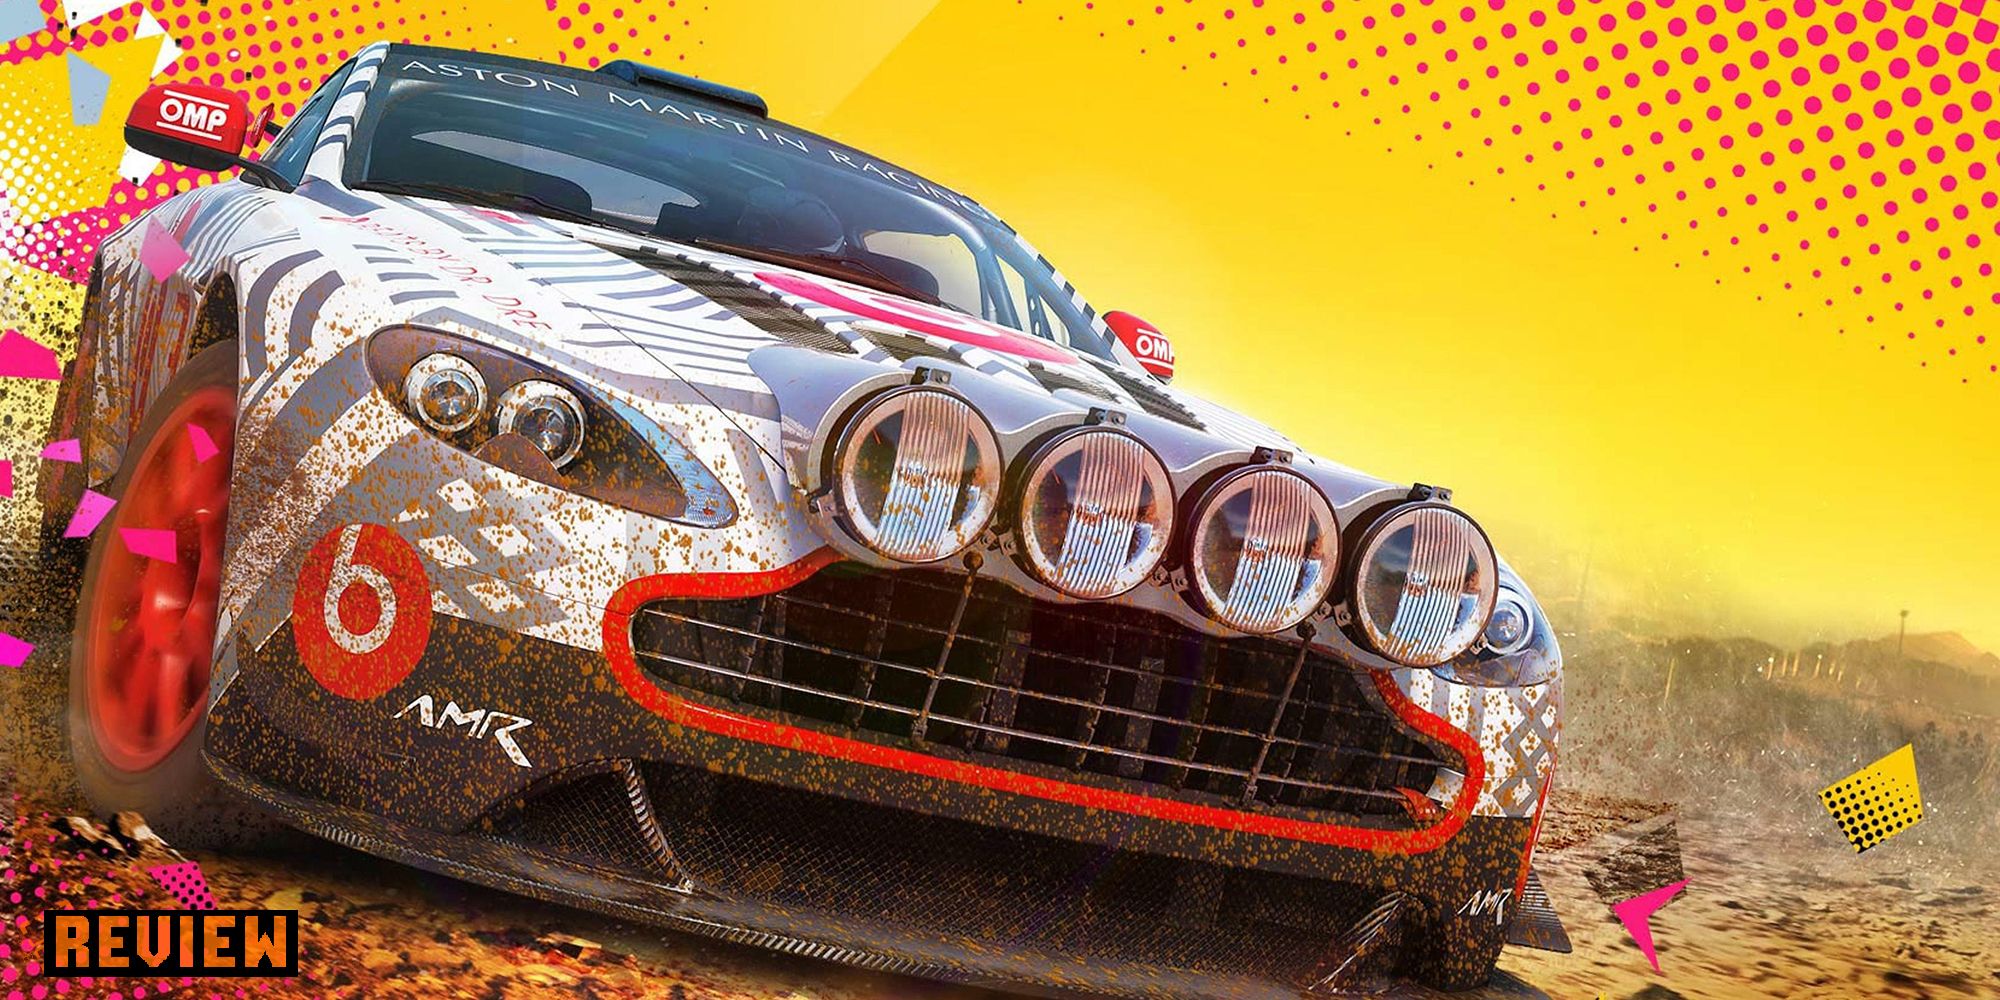 Game art from Dirt 5.